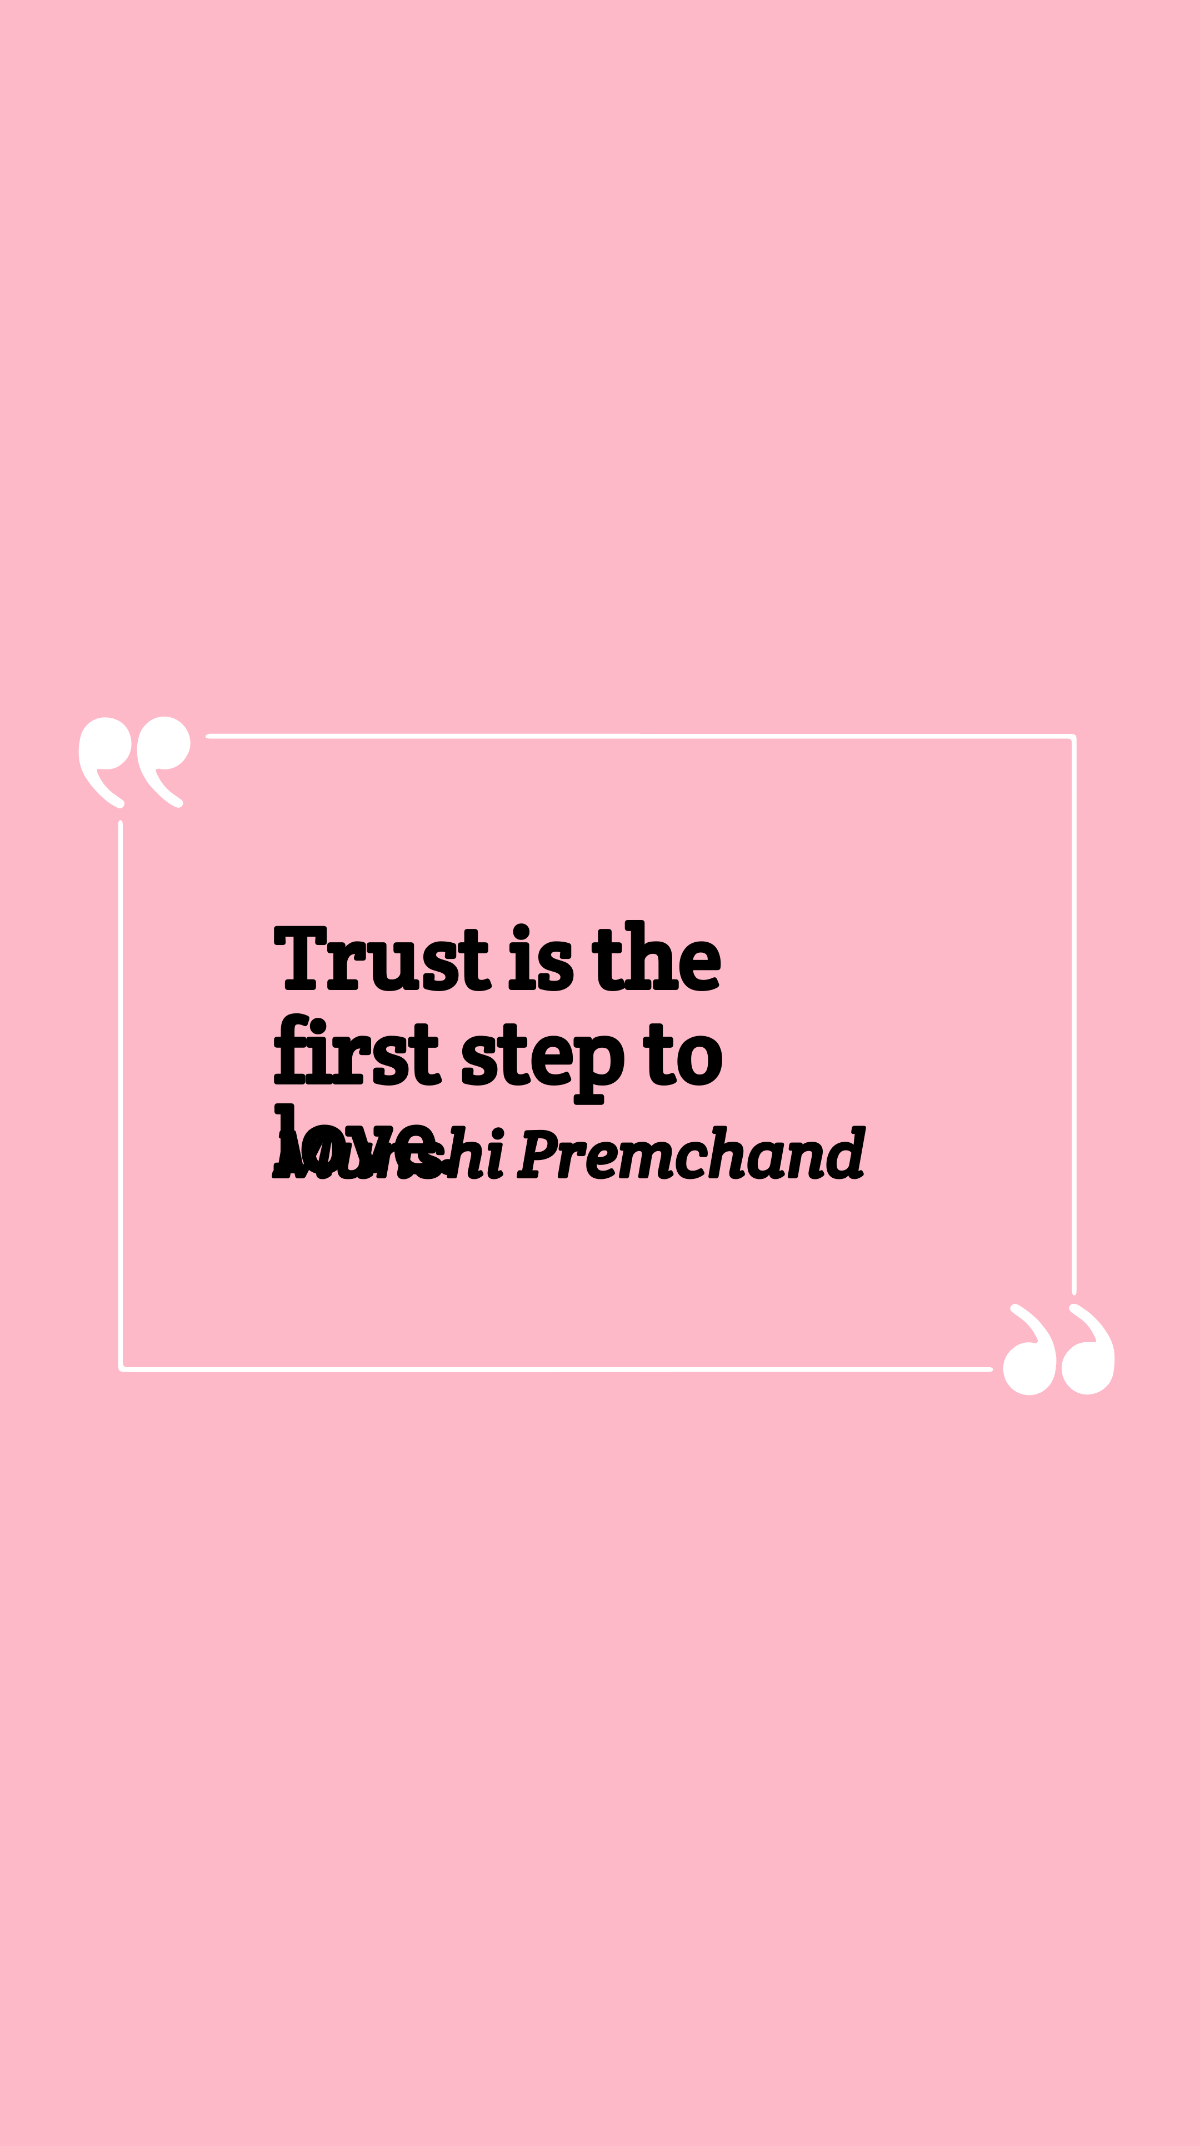 Free Munshi Premchand - Trust is the first step to love. Template